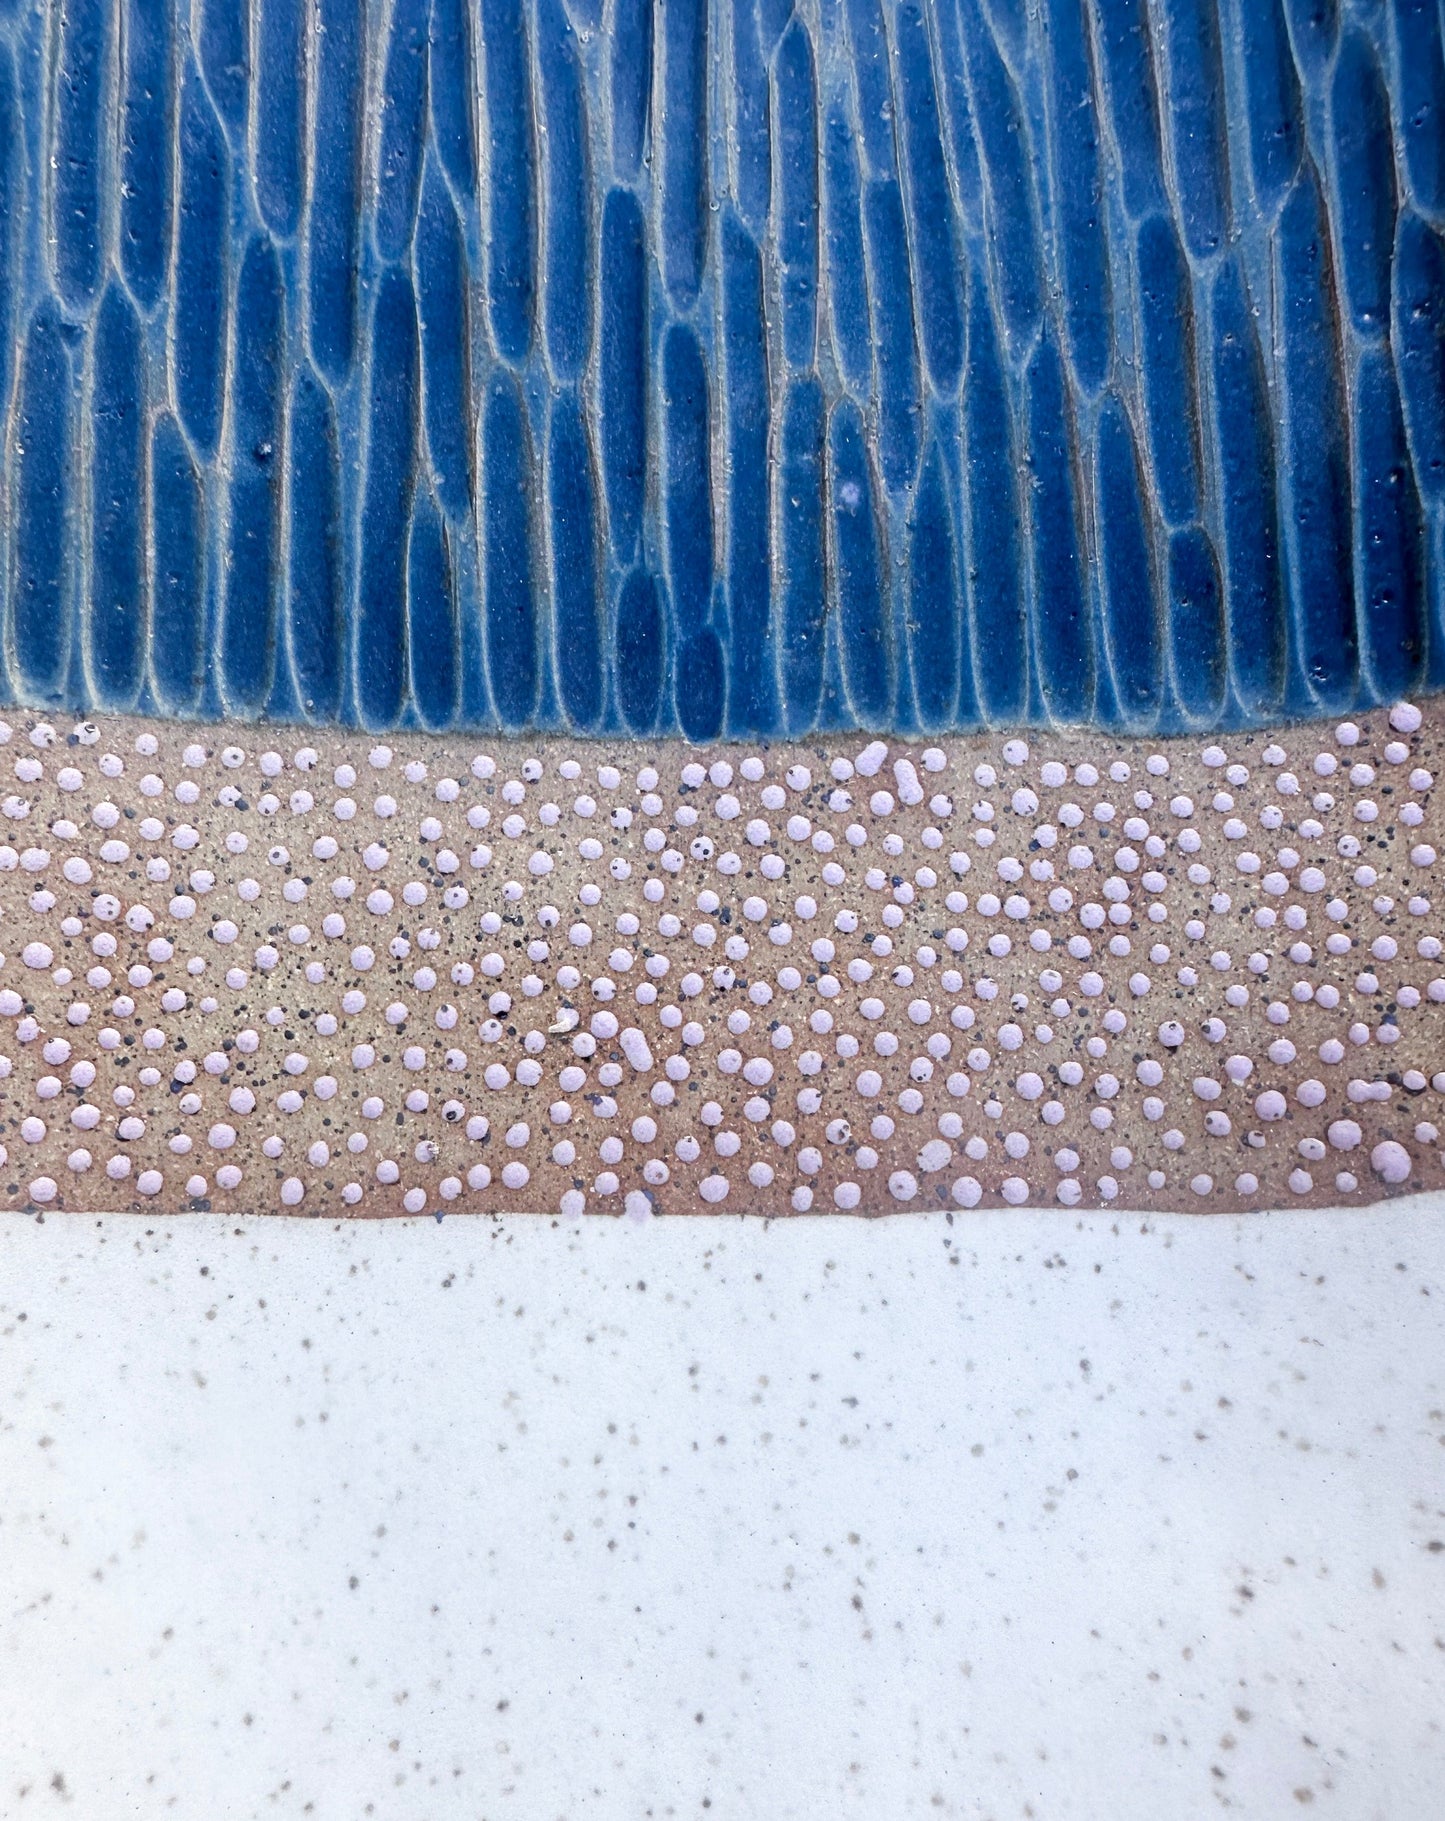 Blue/White Speckled Tray